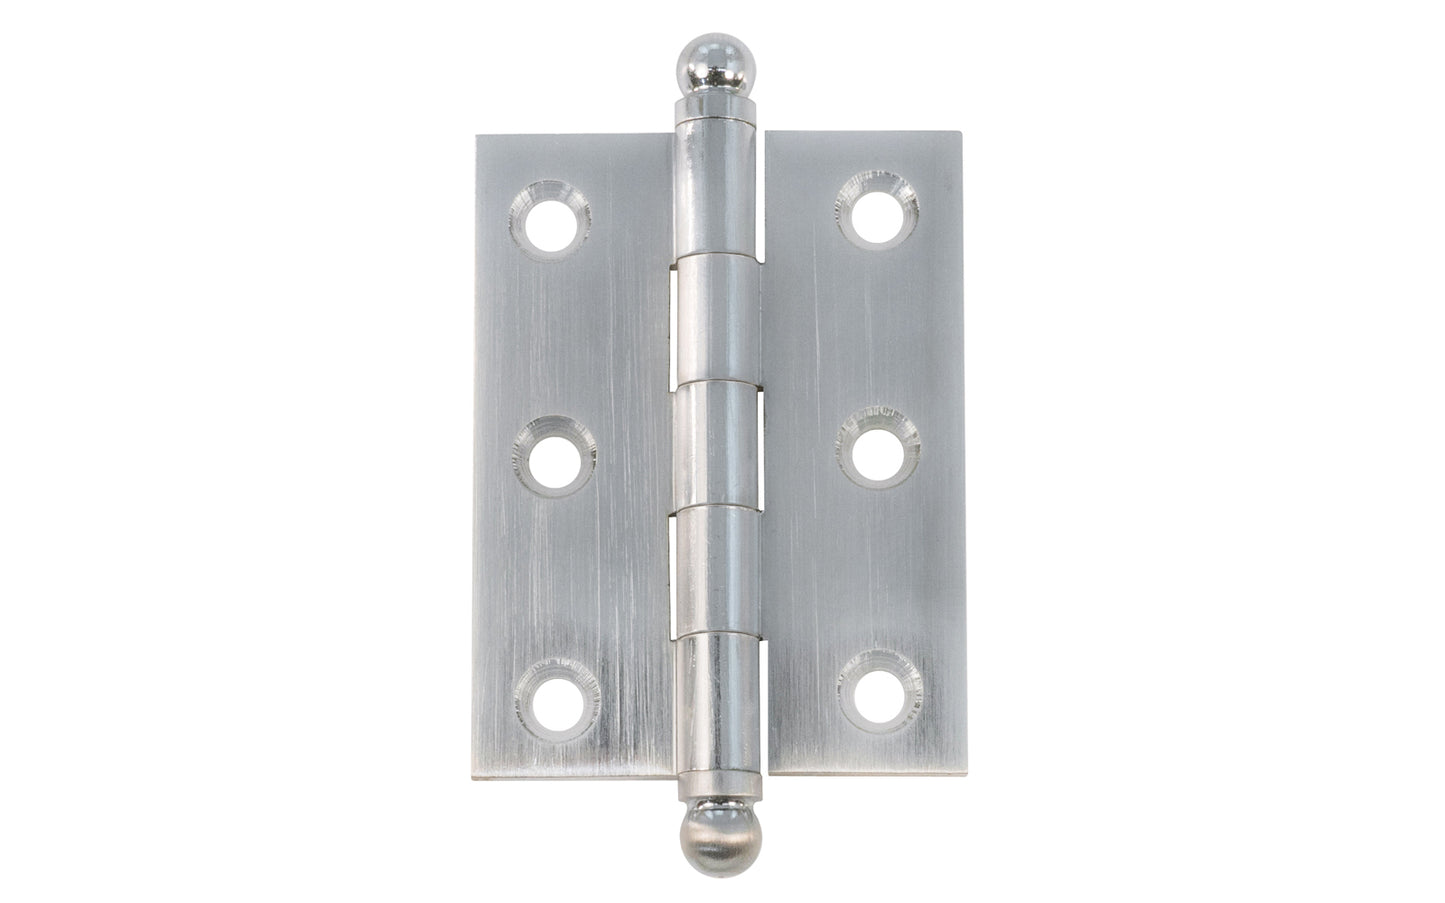 Classic Solid Brass Ball-Tip Cabinet Hinge ~ 2" x 1-1/2". Full mortise extruded hinges. 3/32" heavy duty leaf thickness gauge. Non-removable fixed hinge pin with ball tips. High quality thick cabinet hinge with ball tips. Brushed Chrome finish.